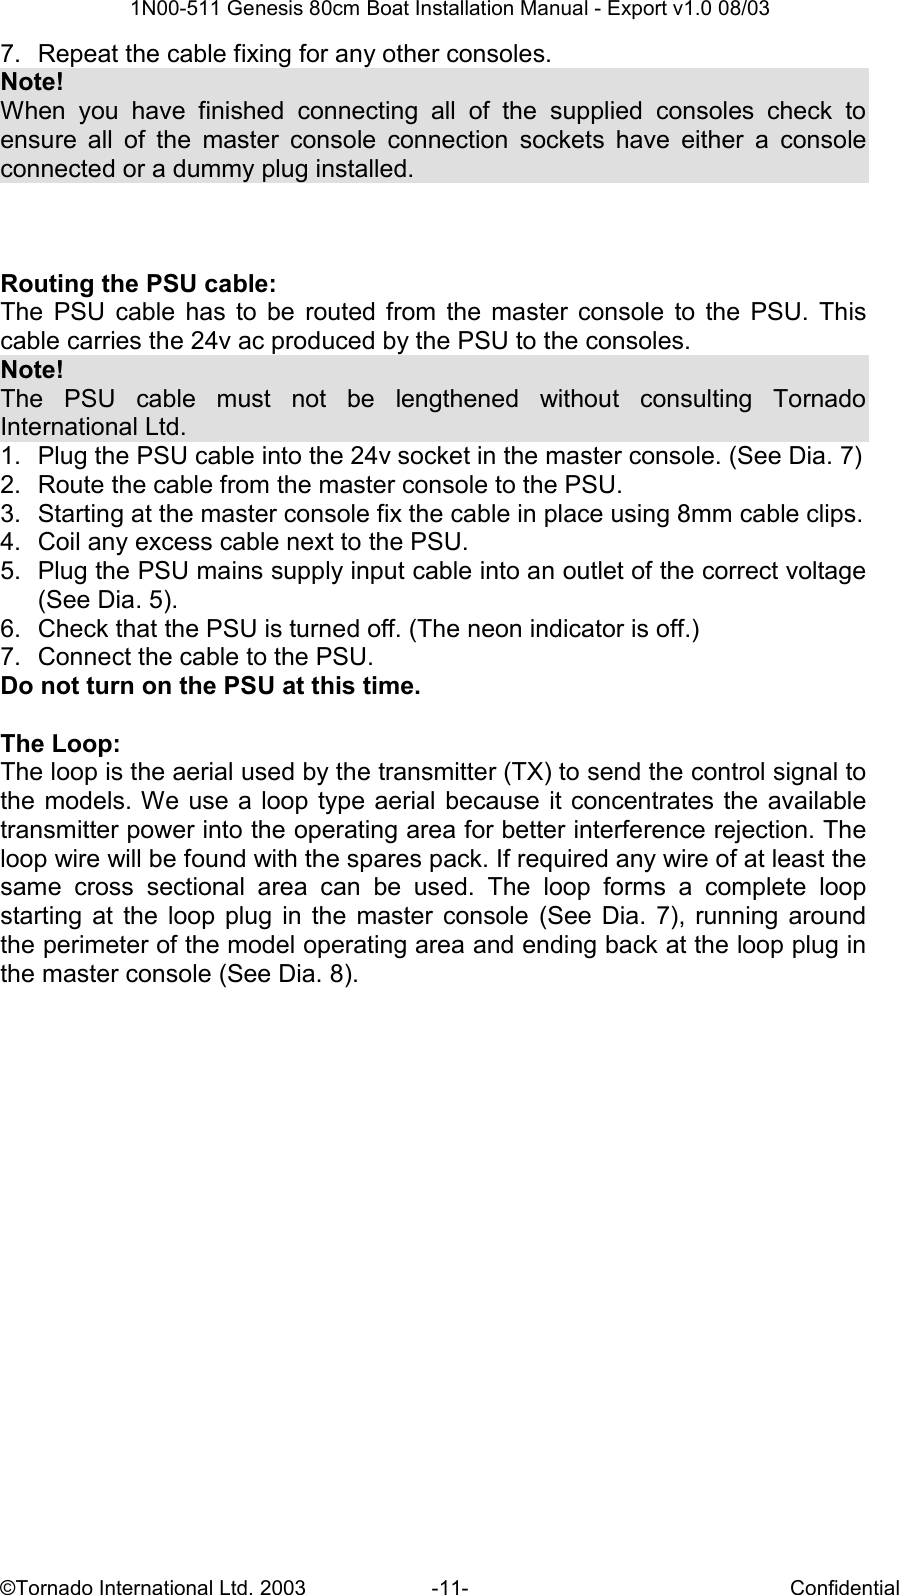  1N00-511 Genesis 80cm Boat Installation Manual - Export v1.0 08/03 ©Tornado International Ltd. 2003  -11-  Confidential 7.  Repeat the cable fixing for any other consoles.  Note! When  you  have  finished  connecting  all  of  the  supplied  consoles  check  to ensure  all  of  the  master  console  connection  sockets  have  either  a  console connected or a dummy plug installed.     Routing the PSU cable: The  PSU  cable  has  to  be  routed  from  the  master  console  to  the  PSU.  This cable carries the 24v ac produced by the PSU to the consoles. Note! The  PSU  cable  must  not  be  lengthened  without  consulting  Tornado International Ltd. 1.  Plug the PSU cable into the 24v socket in the master console. (See Dia. 7) 2.  Route the cable from the master console to the PSU. 3.  Starting at the master console fix the cable in place using 8mm cable clips. 4.  Coil any excess cable next to the PSU. 5.  Plug the PSU mains supply input cable into an outlet of the correct voltage (See Dia. 5). 6.  Check that the PSU is turned off. (The neon indicator is off.) 7.  Connect the cable to the PSU. Do not turn on the PSU at this time.  The Loop: The loop is the aerial used by the transmitter (TX) to send the control signal to the models. We use a loop type aerial  because it concentrates the  available transmitter power into the operating area for better interference rejection. The loop wire will be found with the spares pack. If required any wire of at least the same  cross  sectional  area  can  be  used.  The  loop  forms  a  complete  loop starting  at  the  loop  plug  in  the  master  console (See  Dia.  7),  running  around the perimeter of the model operating area and ending back at the loop plug in the master console (See Dia. 8). 